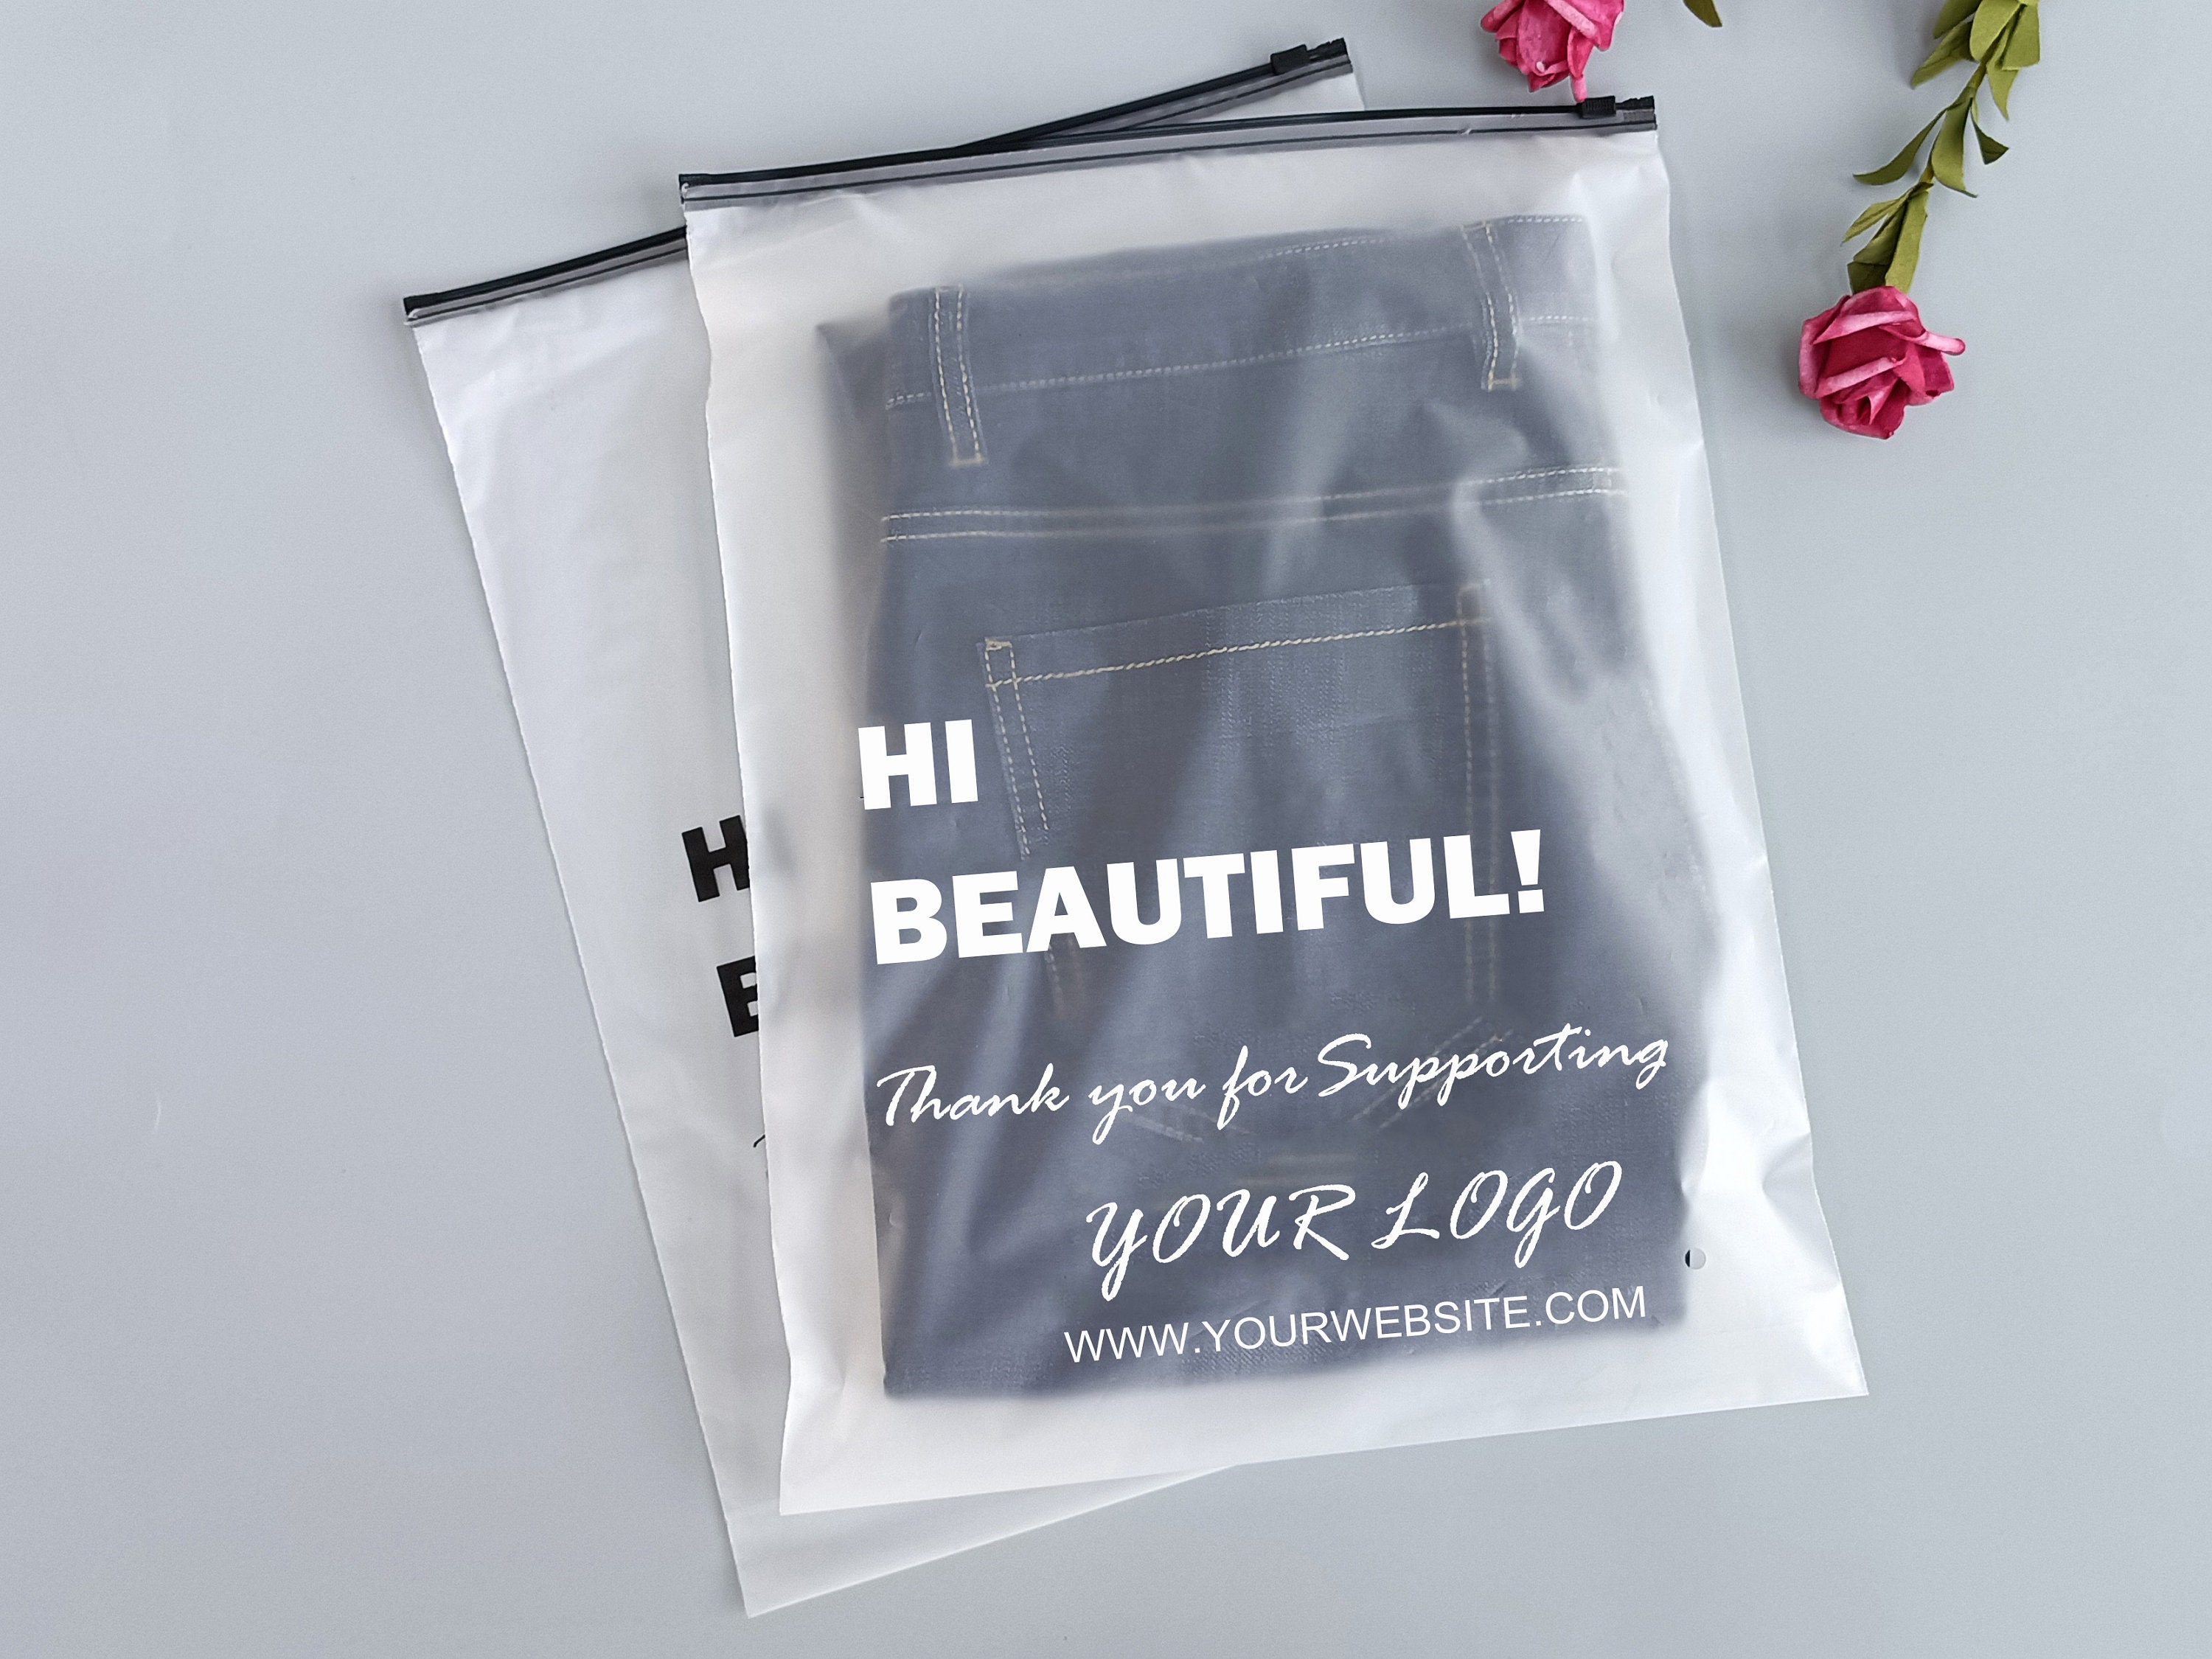 Muka Custom Frosted Cloth Storage Bags Personalized Slider Zip Bag